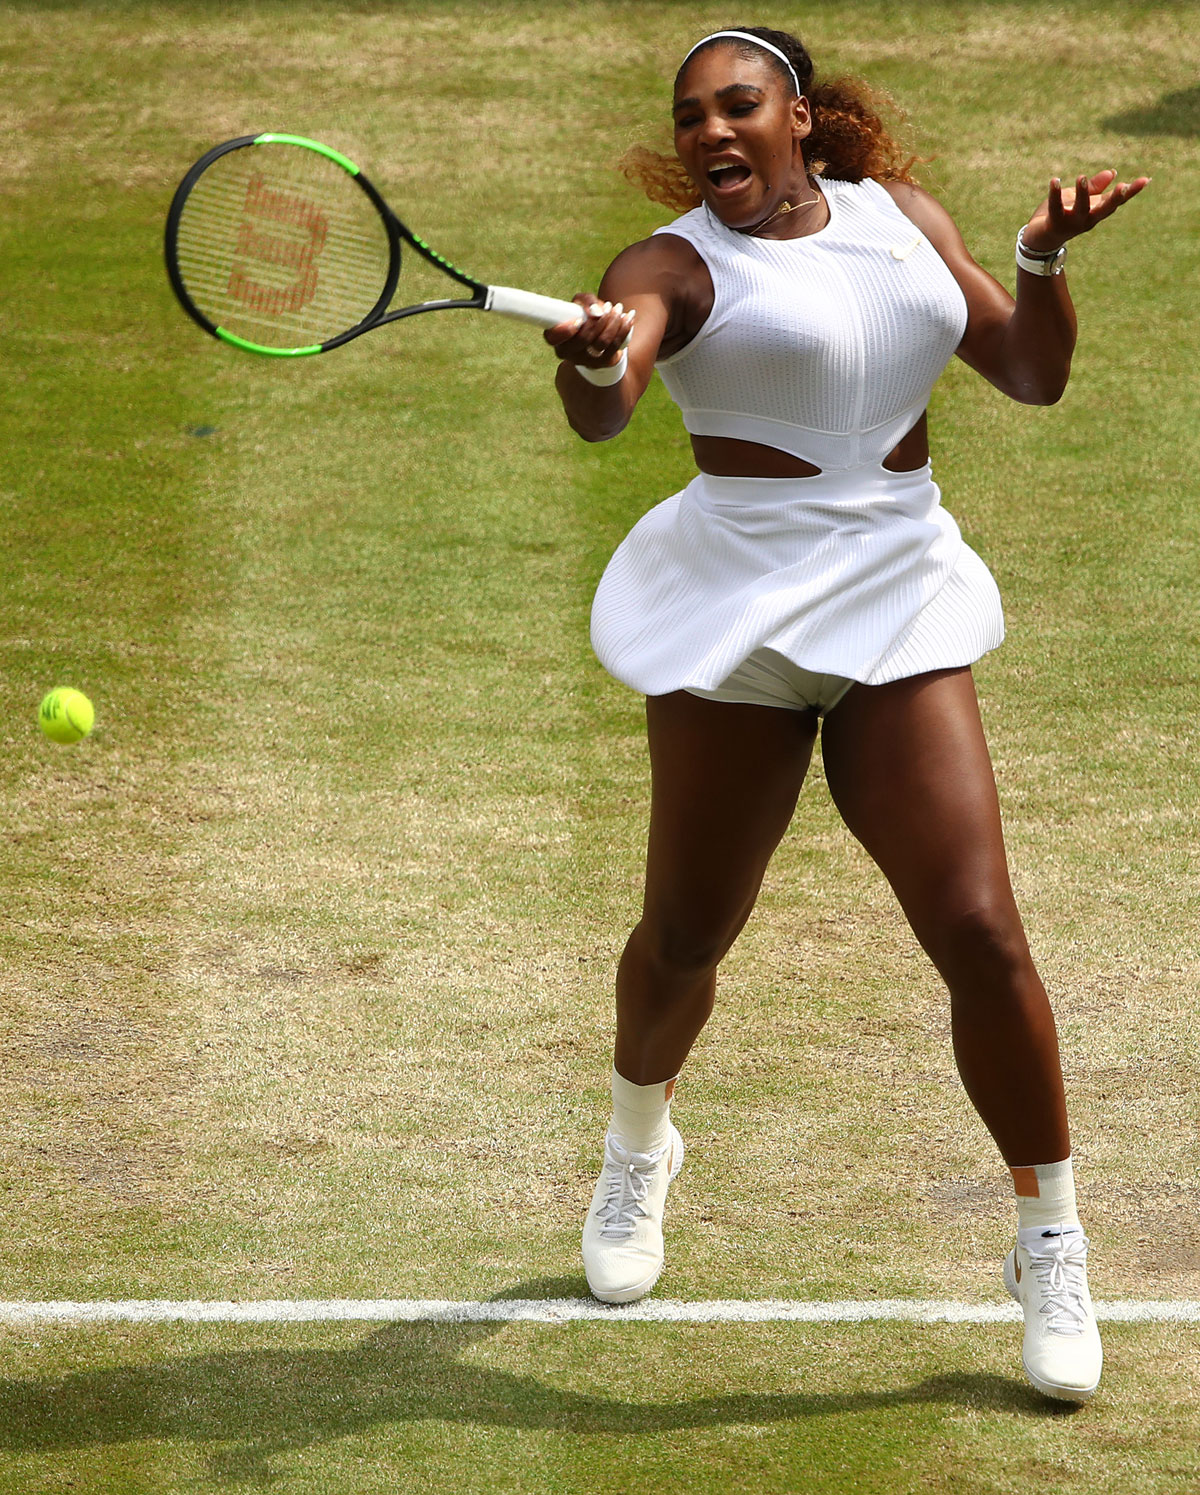 Former World No 1, Serena Williams is a 7-time Wimbledon champion